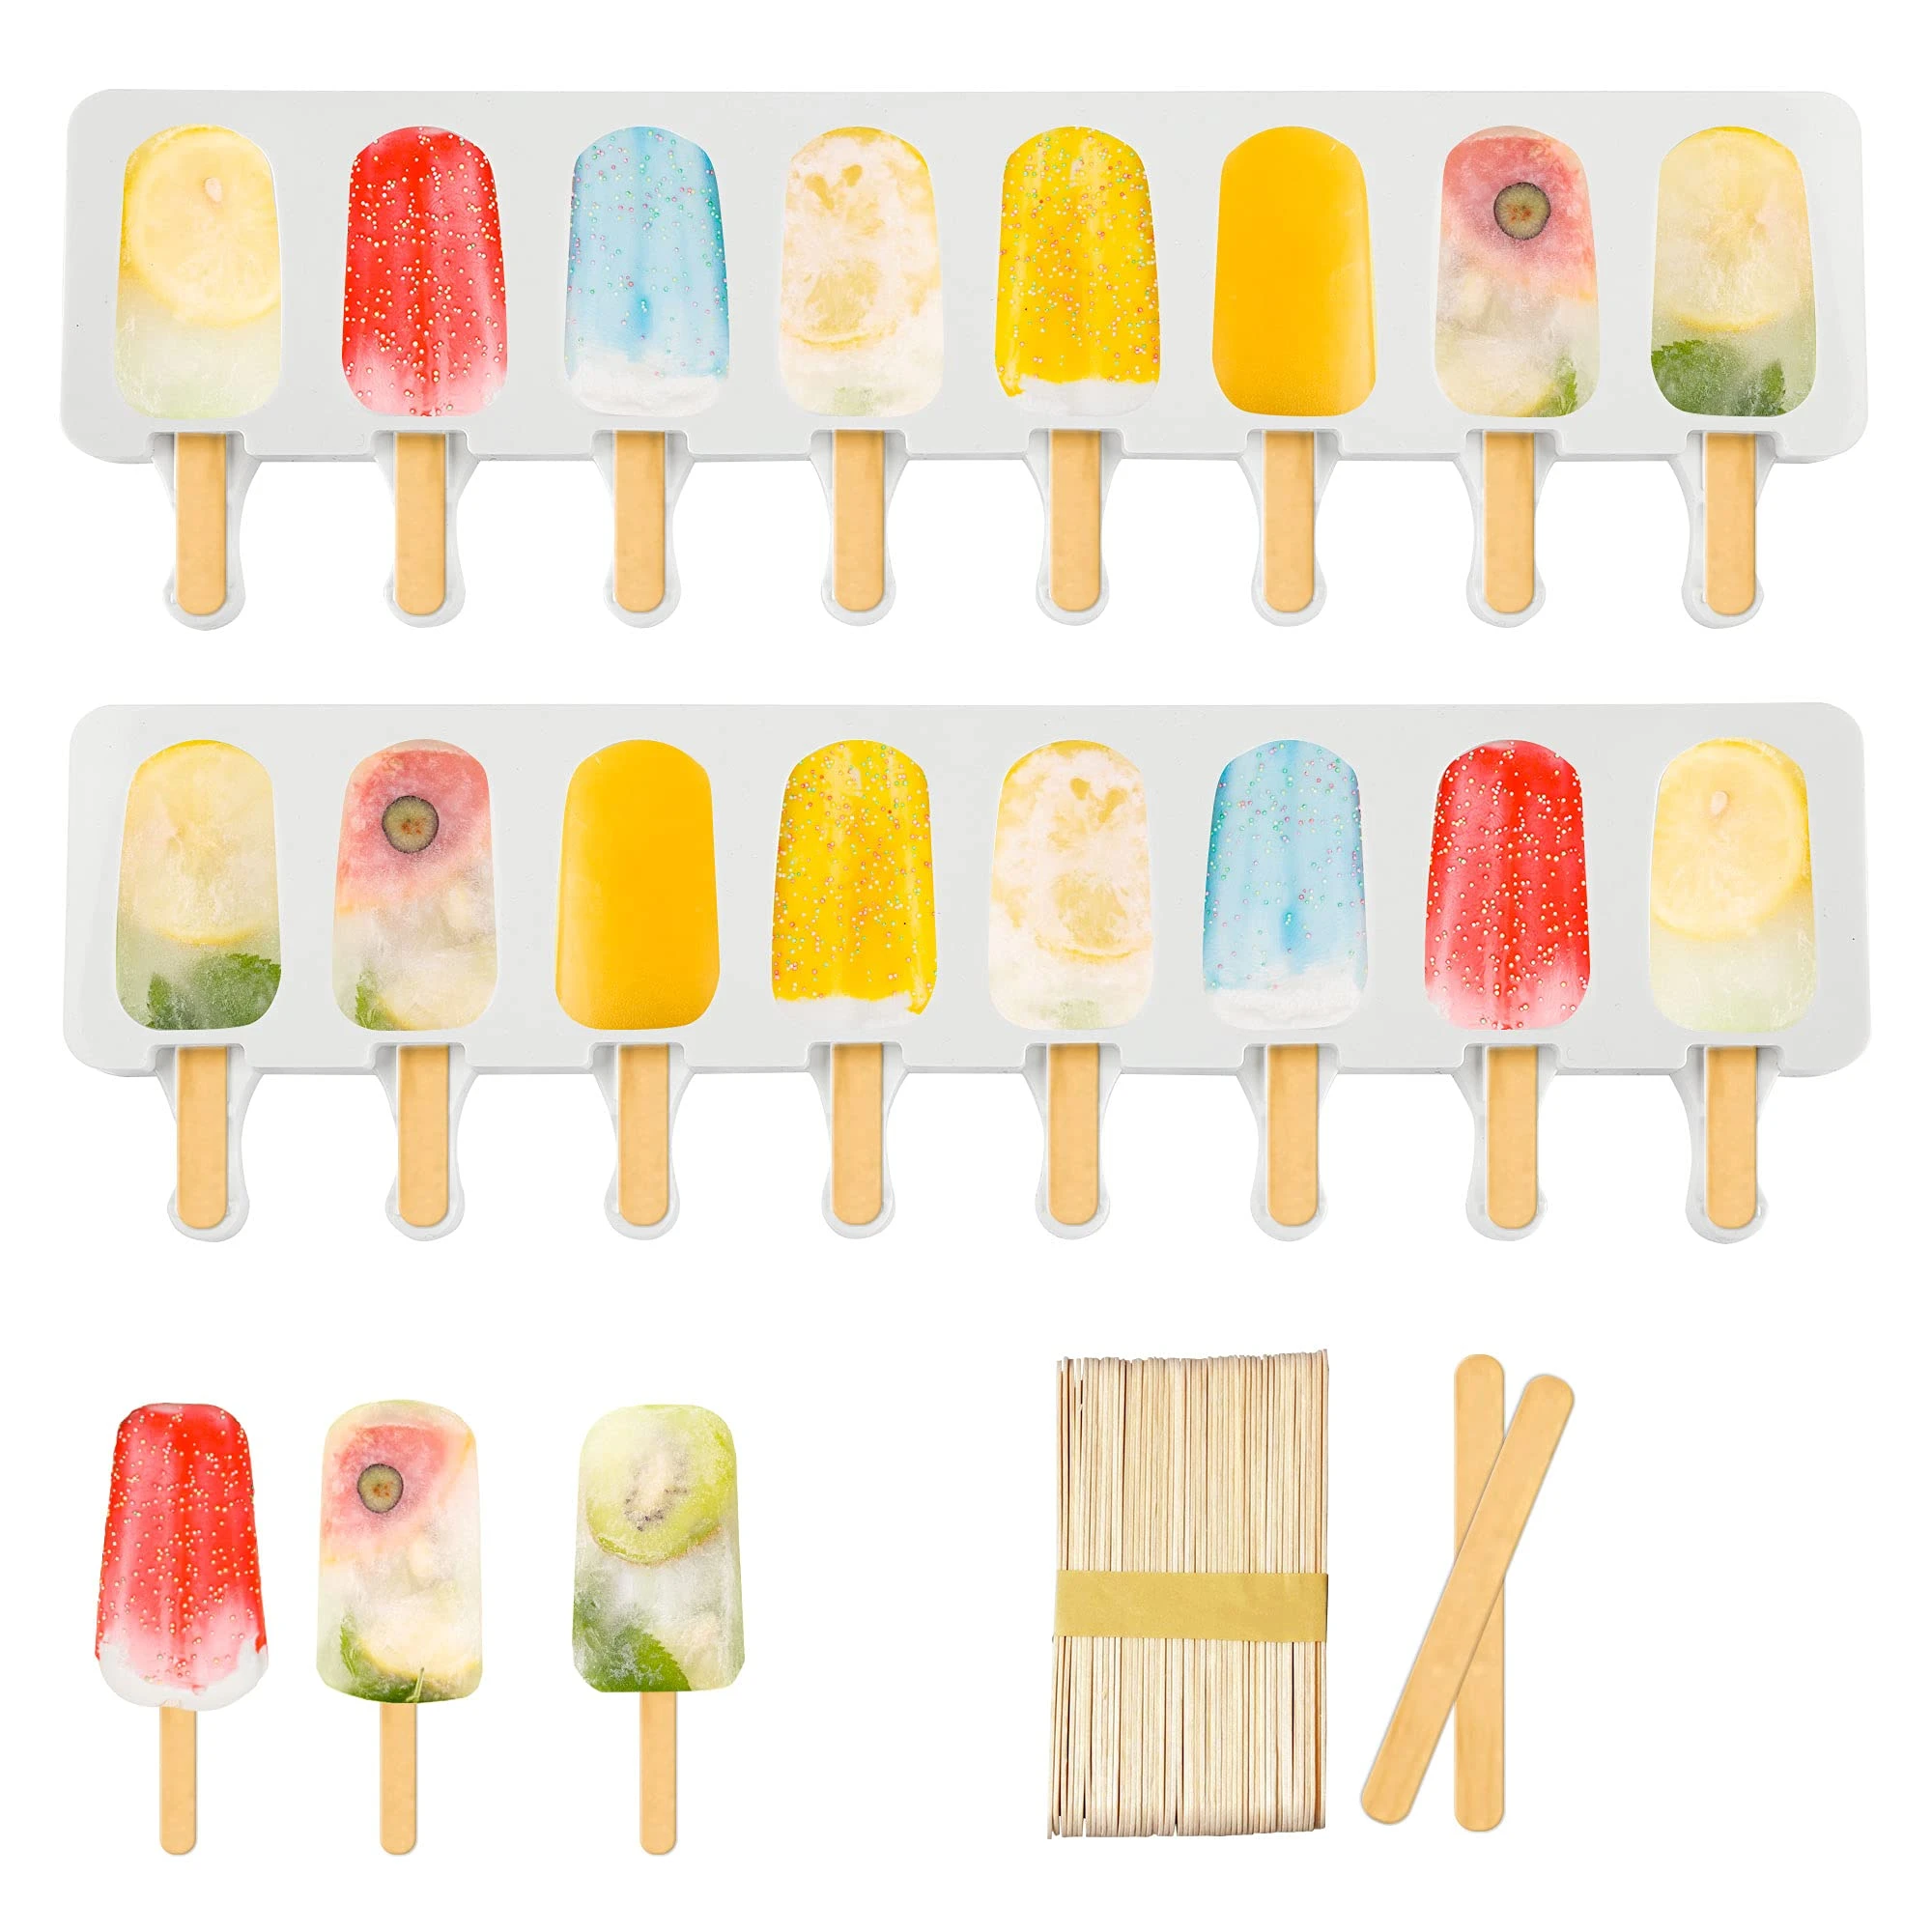 SILIKOLOVE 8 Cavity Ice Cream Mold Popsicle Silicone Molds DIY Homemade Fruit Juice Dessert Ice Pop Lolly Tray Mould